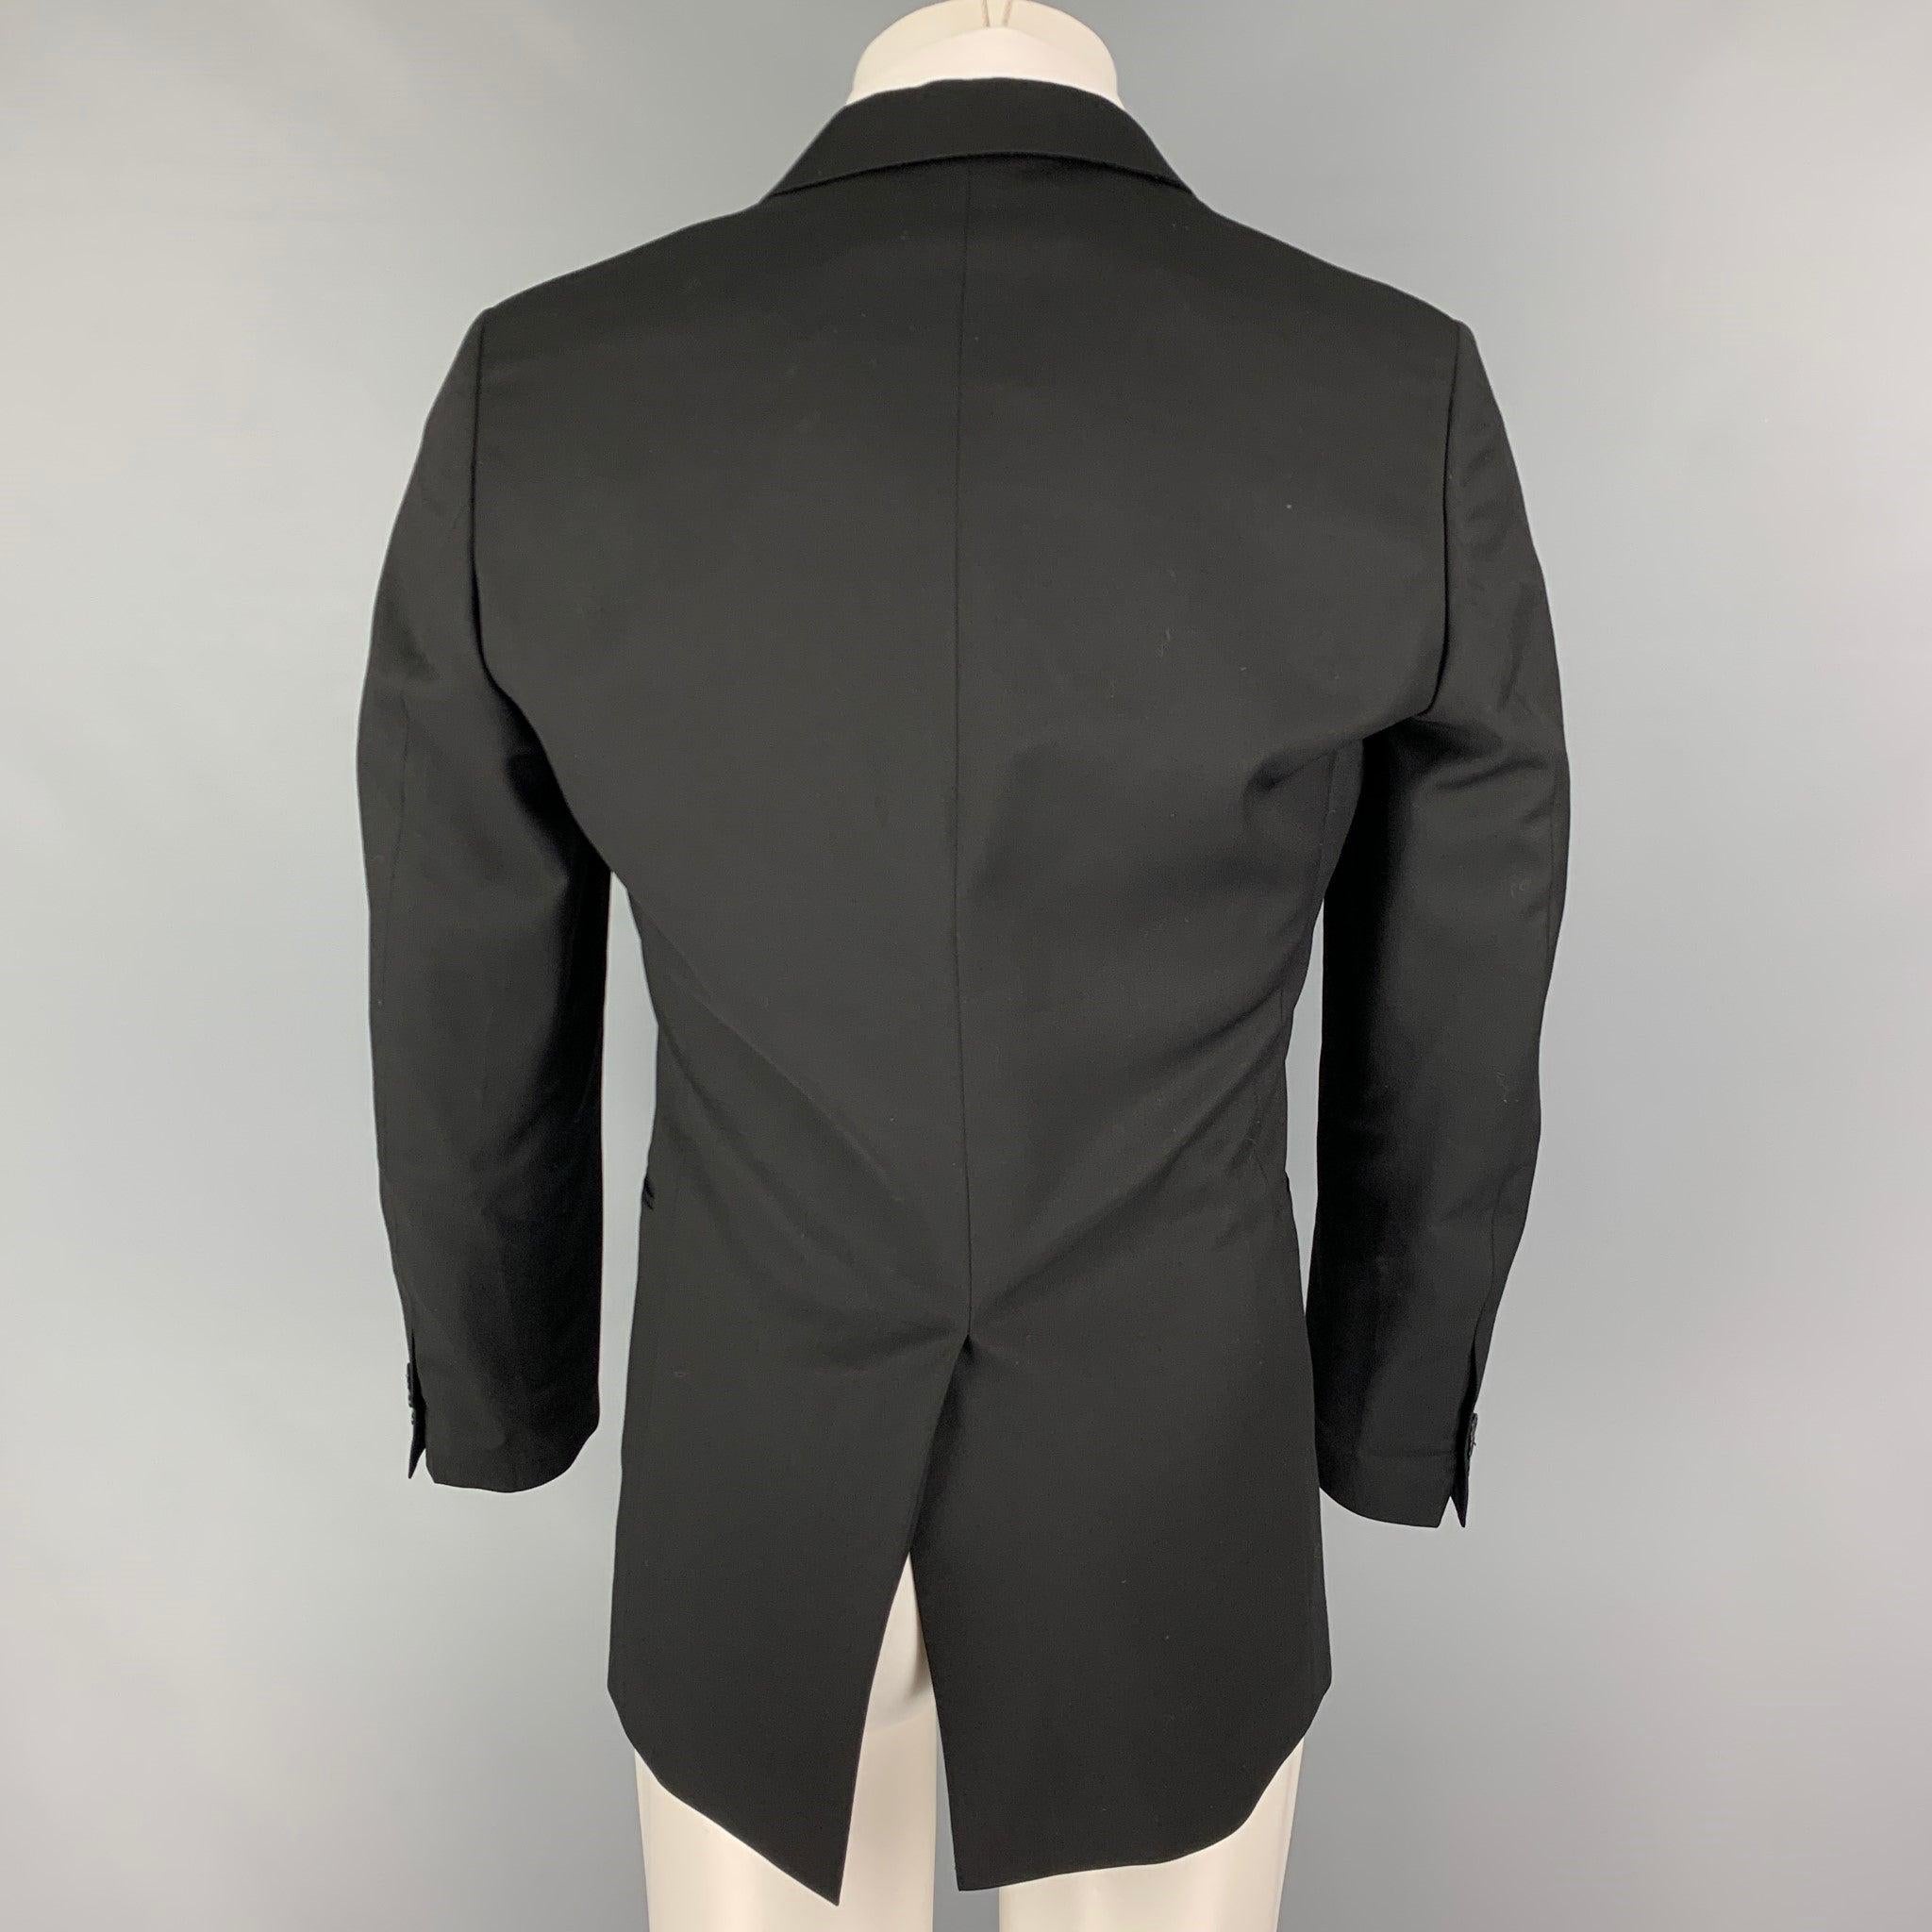 JOHN VARVATOS Size 36 Black Wool Notch Lapel Sport Coat In Good Condition For Sale In San Francisco, CA